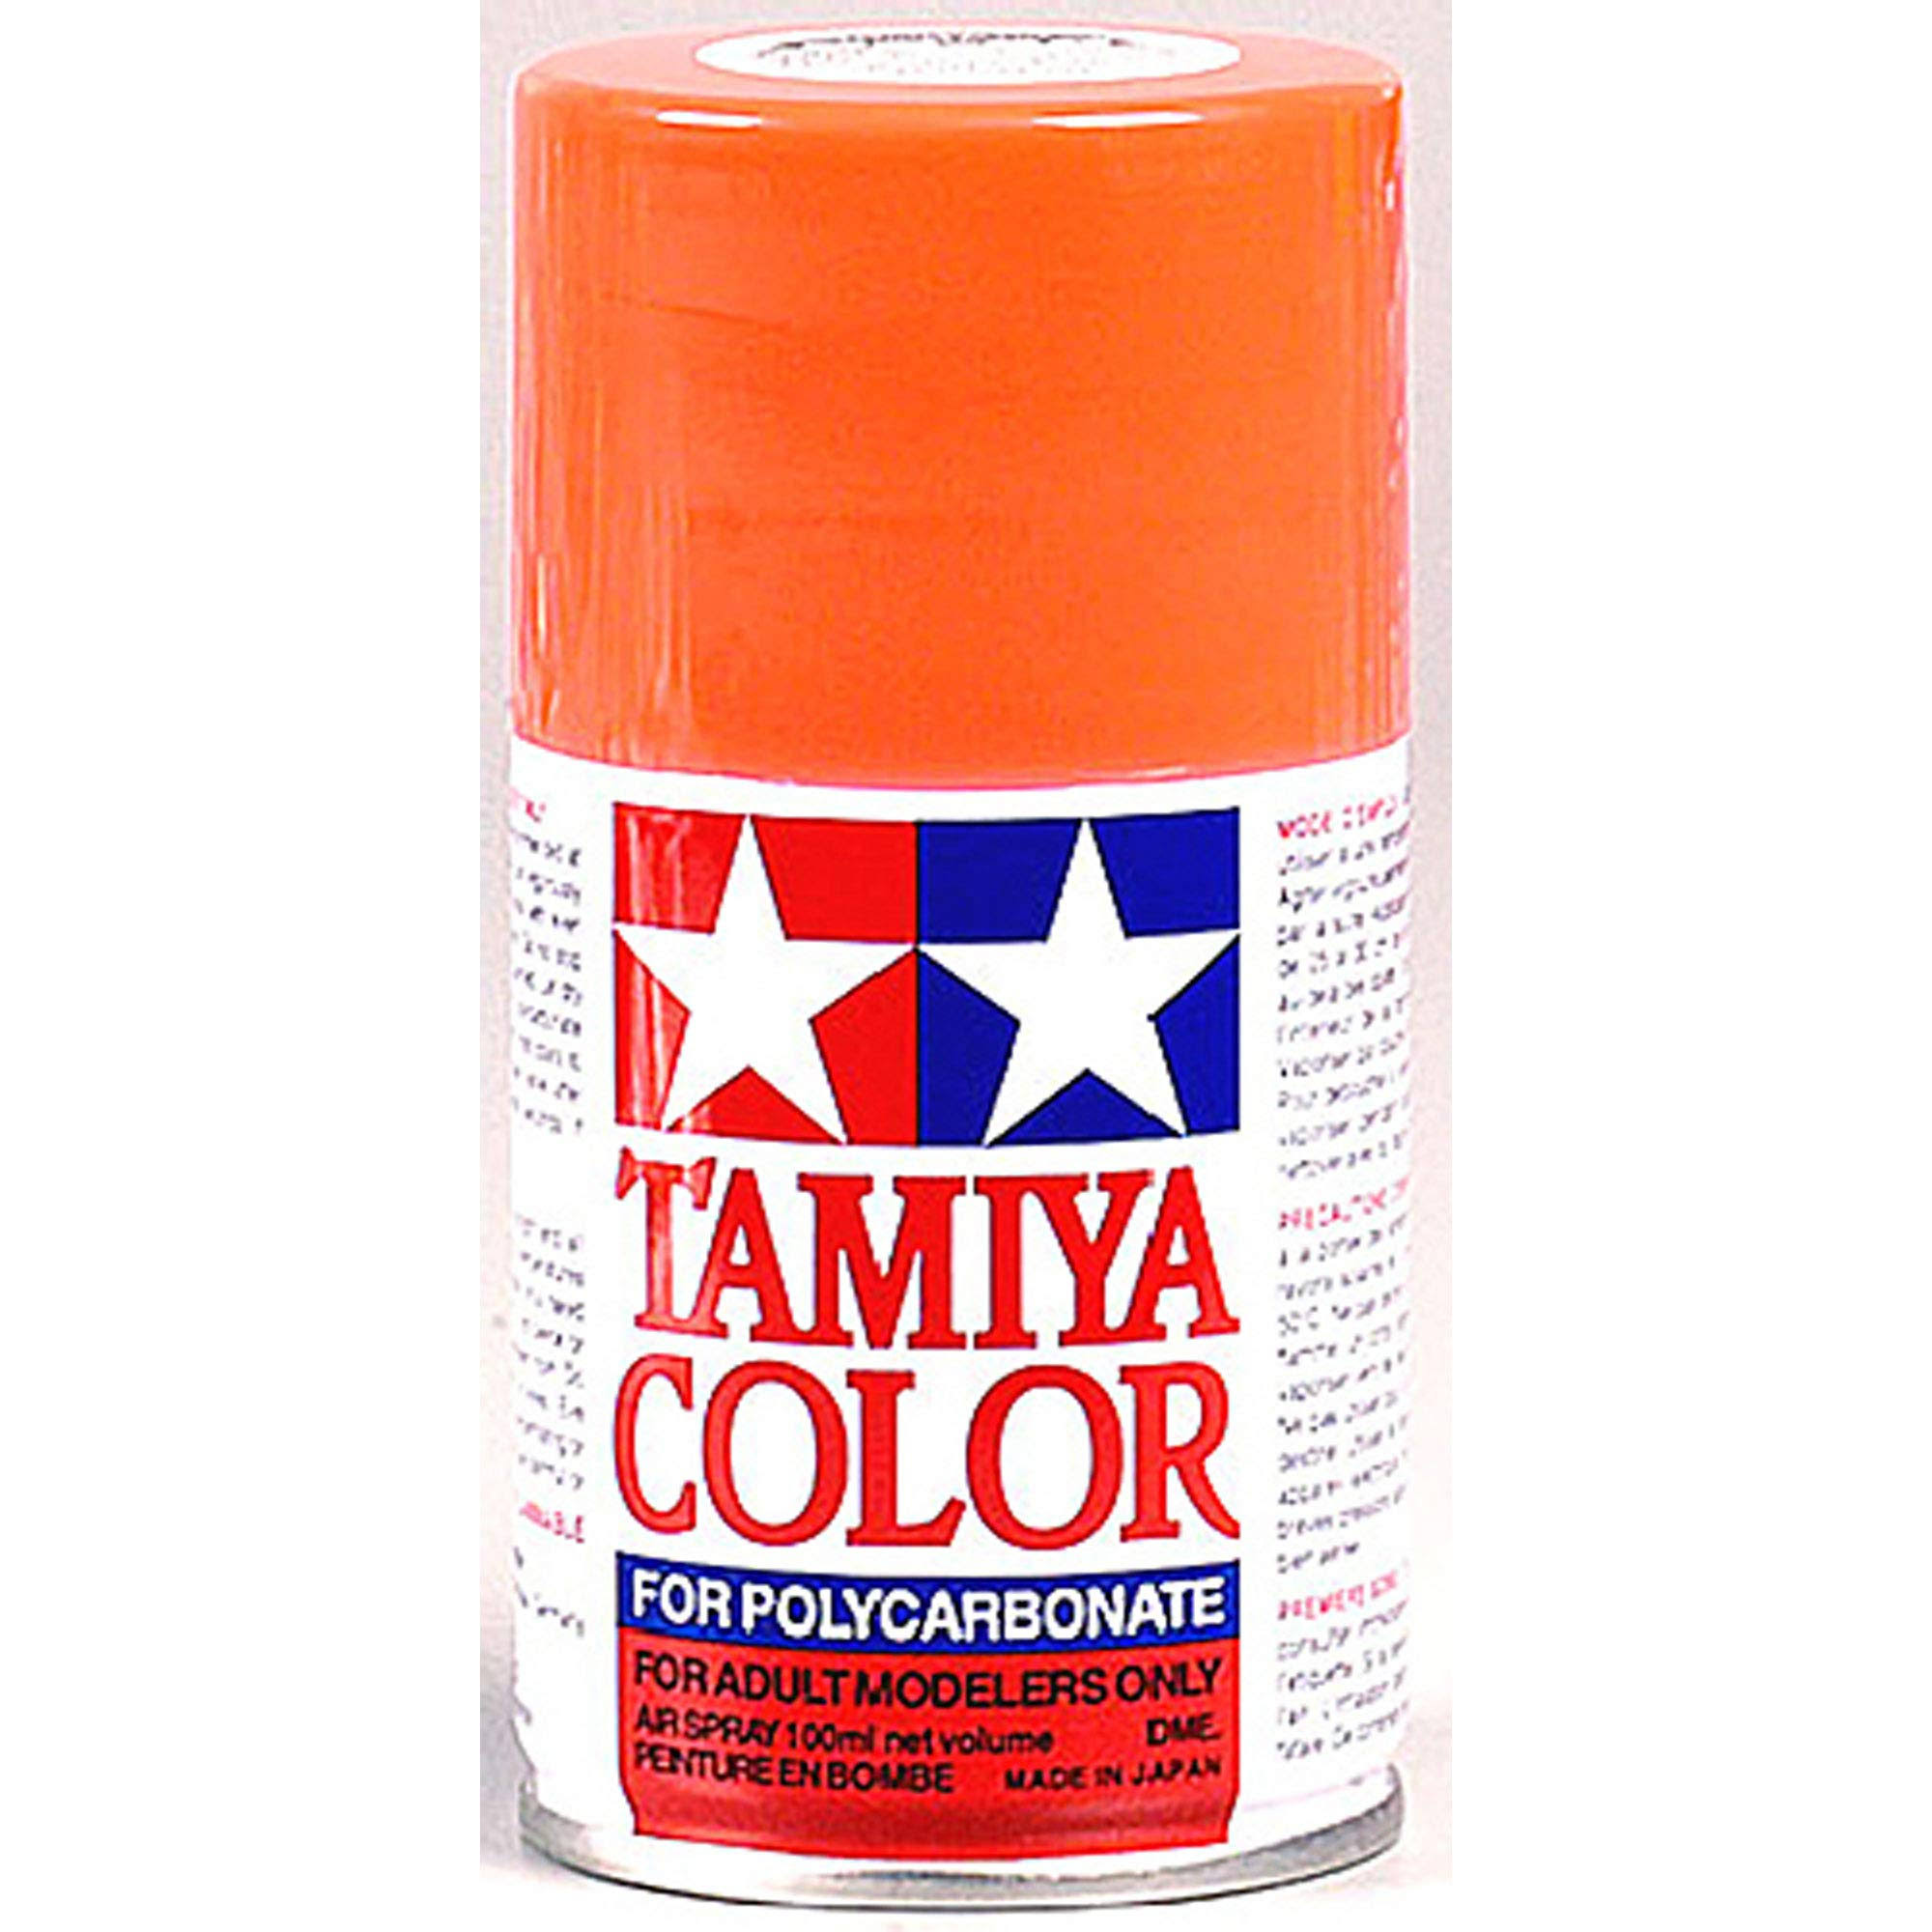 Tamiya Color Polycarbonate Spray Paint - Fluorescent Red